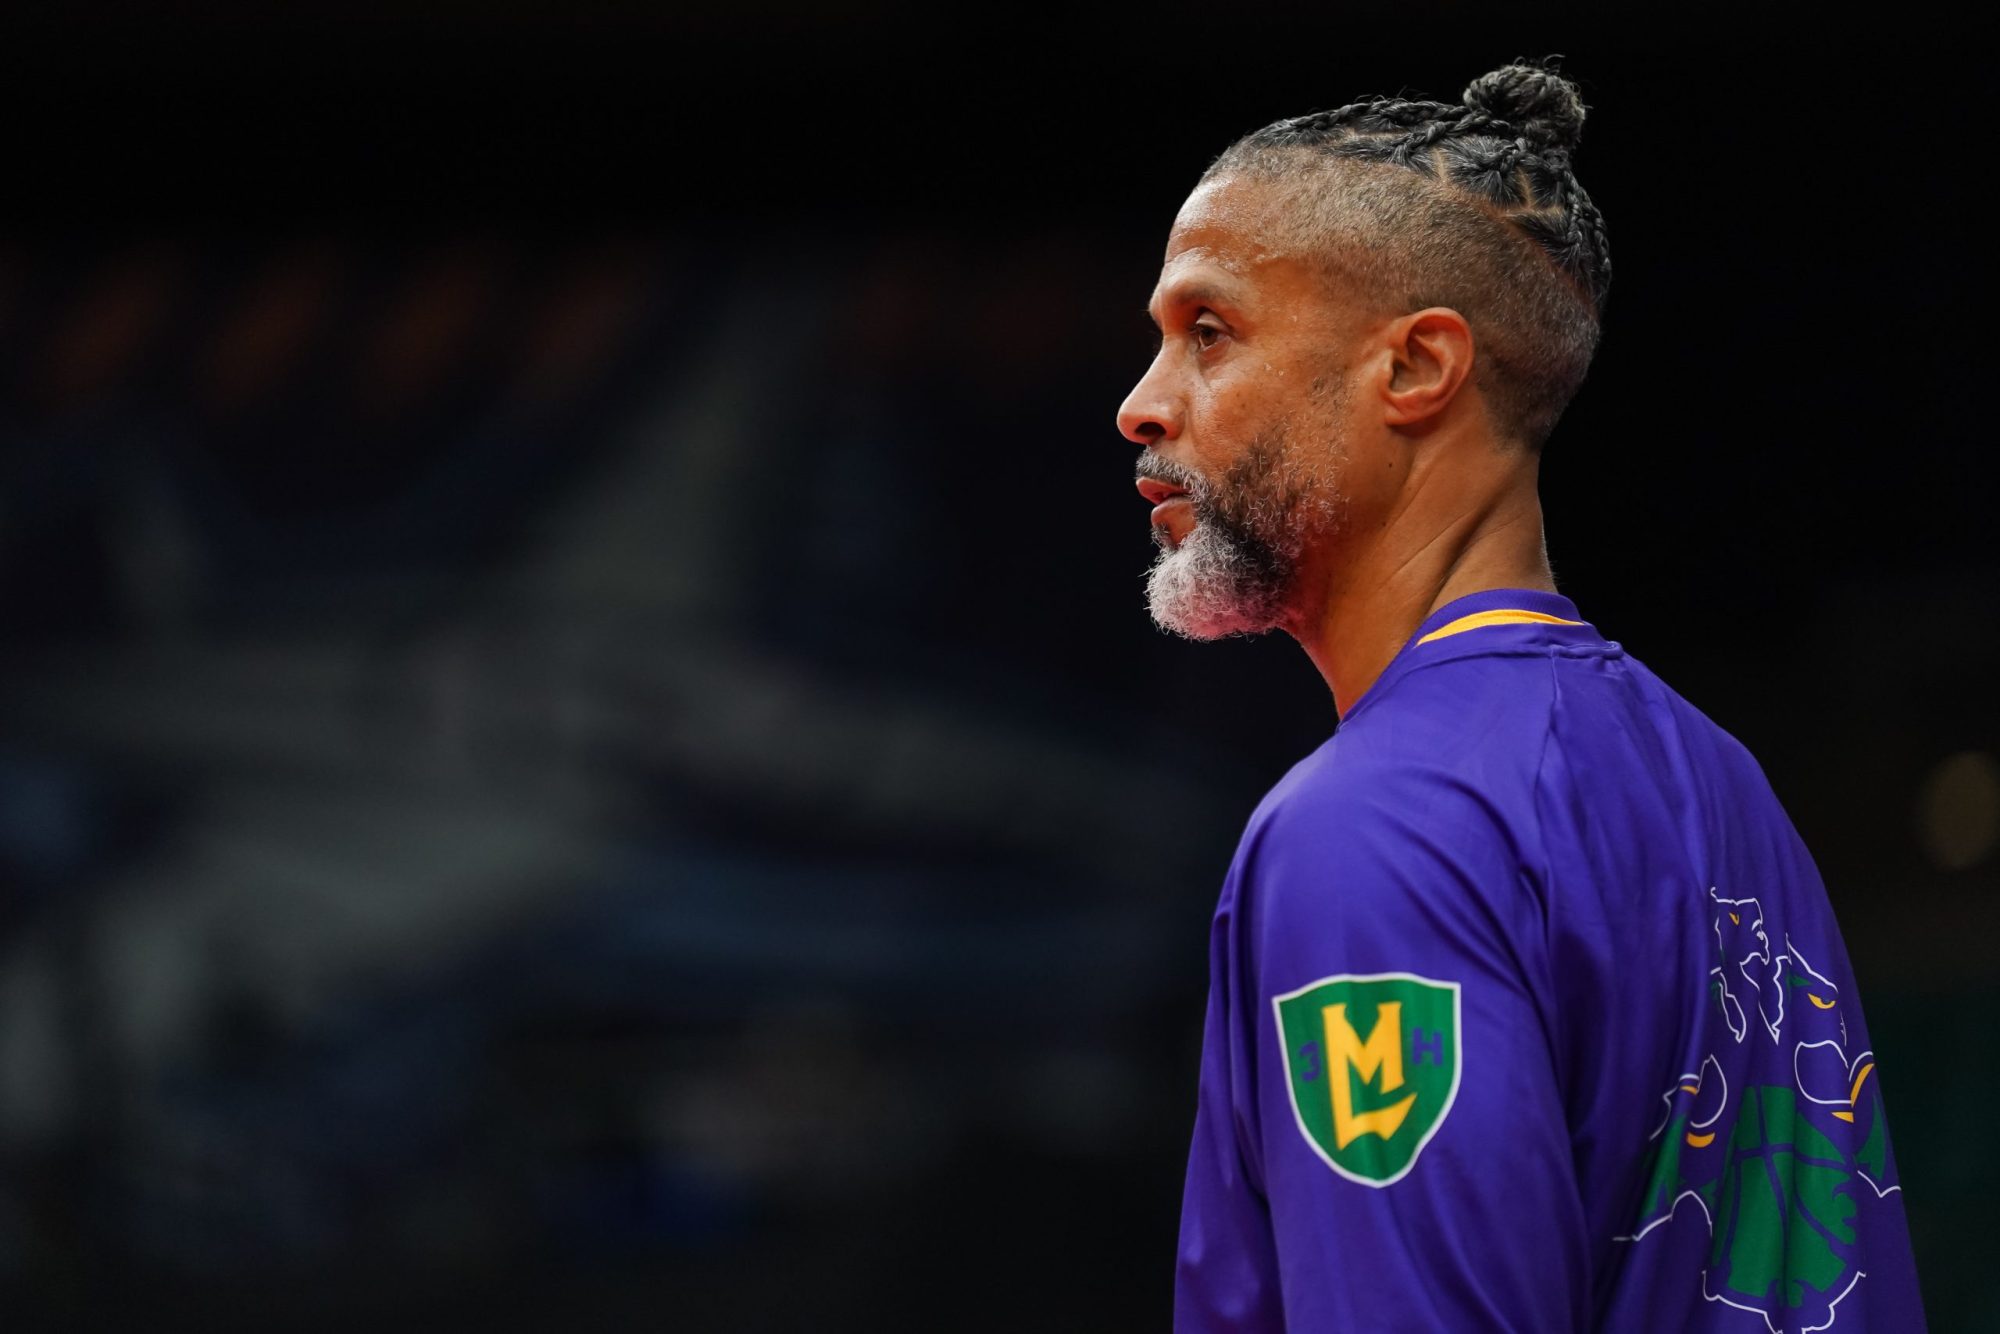 Mahmoud Abdul-Rauf #7 of the 3 Headed Monsters looks on during warmups prior to the game against the Enemies in BIG3 Week 4 at Comerica Center on July 10, 2022 in Frisco, Texas. Photo by Alex Bierens de Haan/Getty Images for BIG3